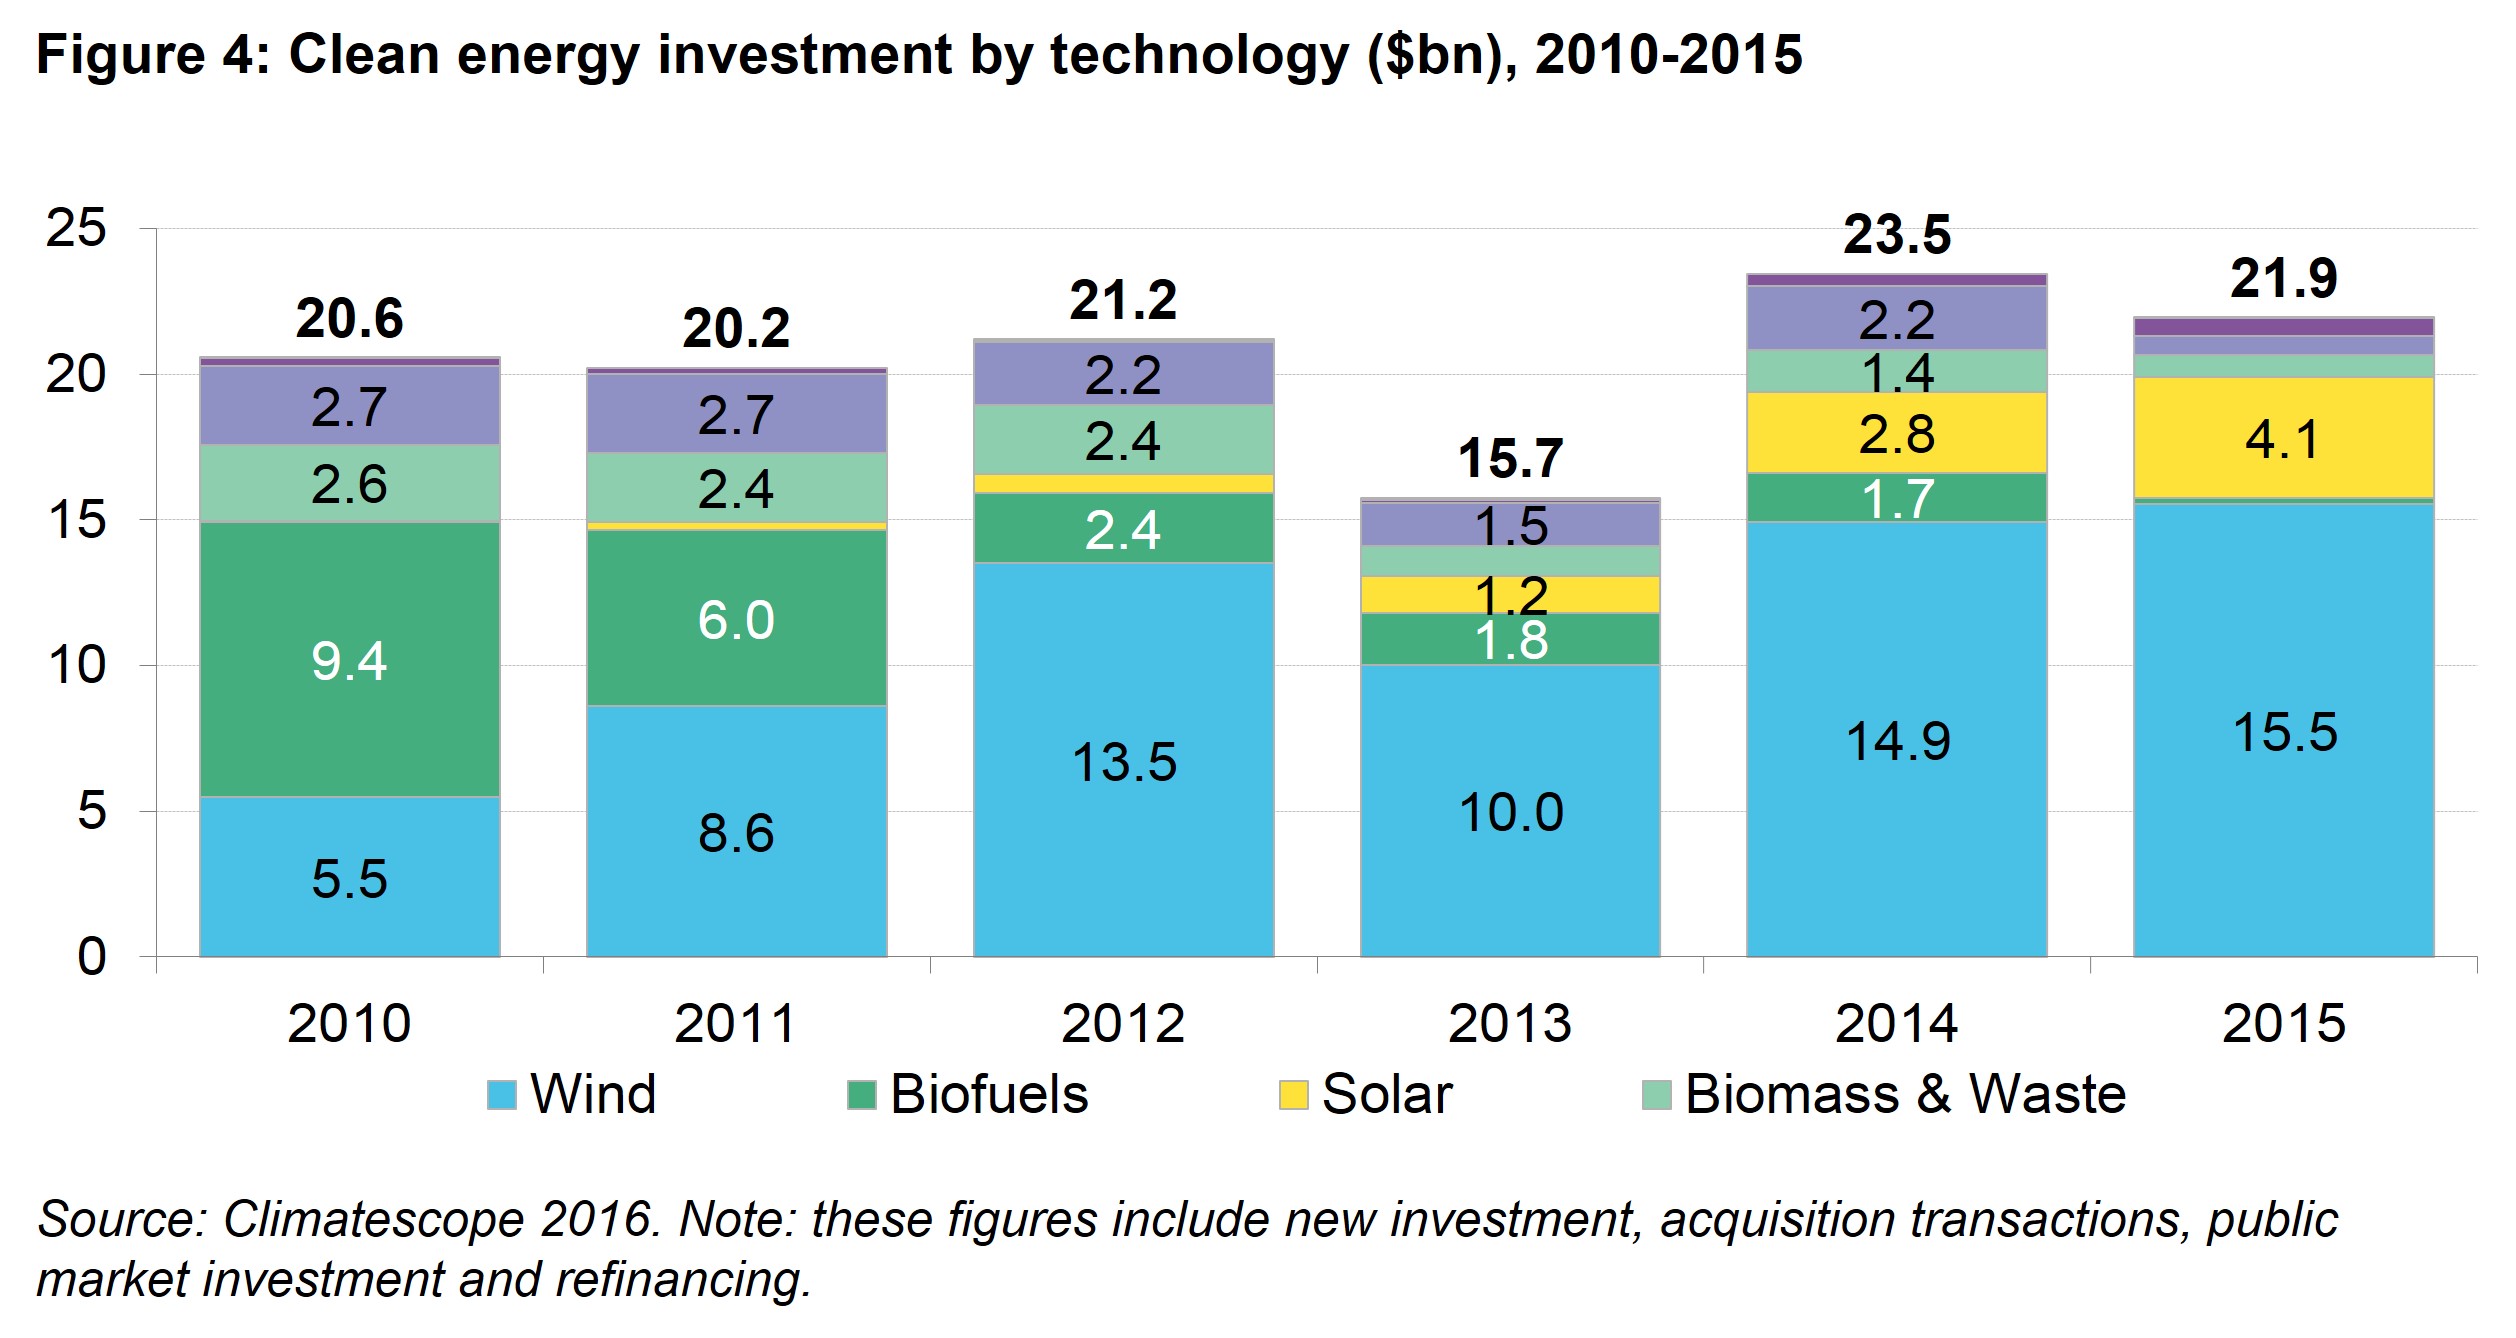 LAC Fig 4 - Clean energy investment by source, 2010 - 2015